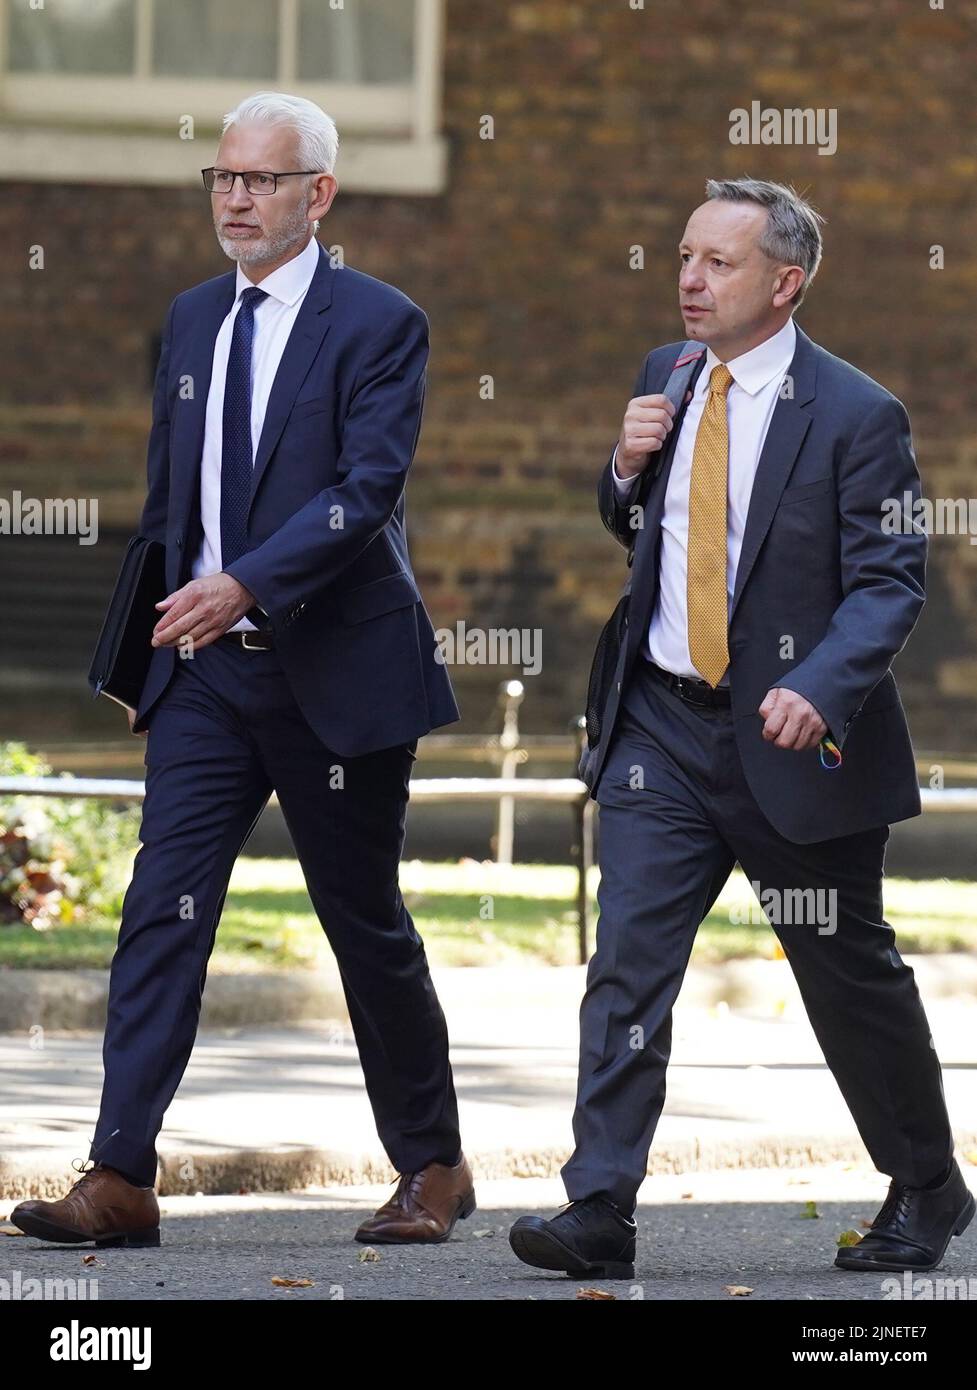 Michael Lewis, E.On chief executive (left), and Ofgem chief executive Jonathan Brearley (right) arriving in Downing Street London, ahead of a meeting between Downing Street and bosses from leading energy firms to discuss rising energy prices. Picture date: Thursday August 11, 2022. Stock Photo